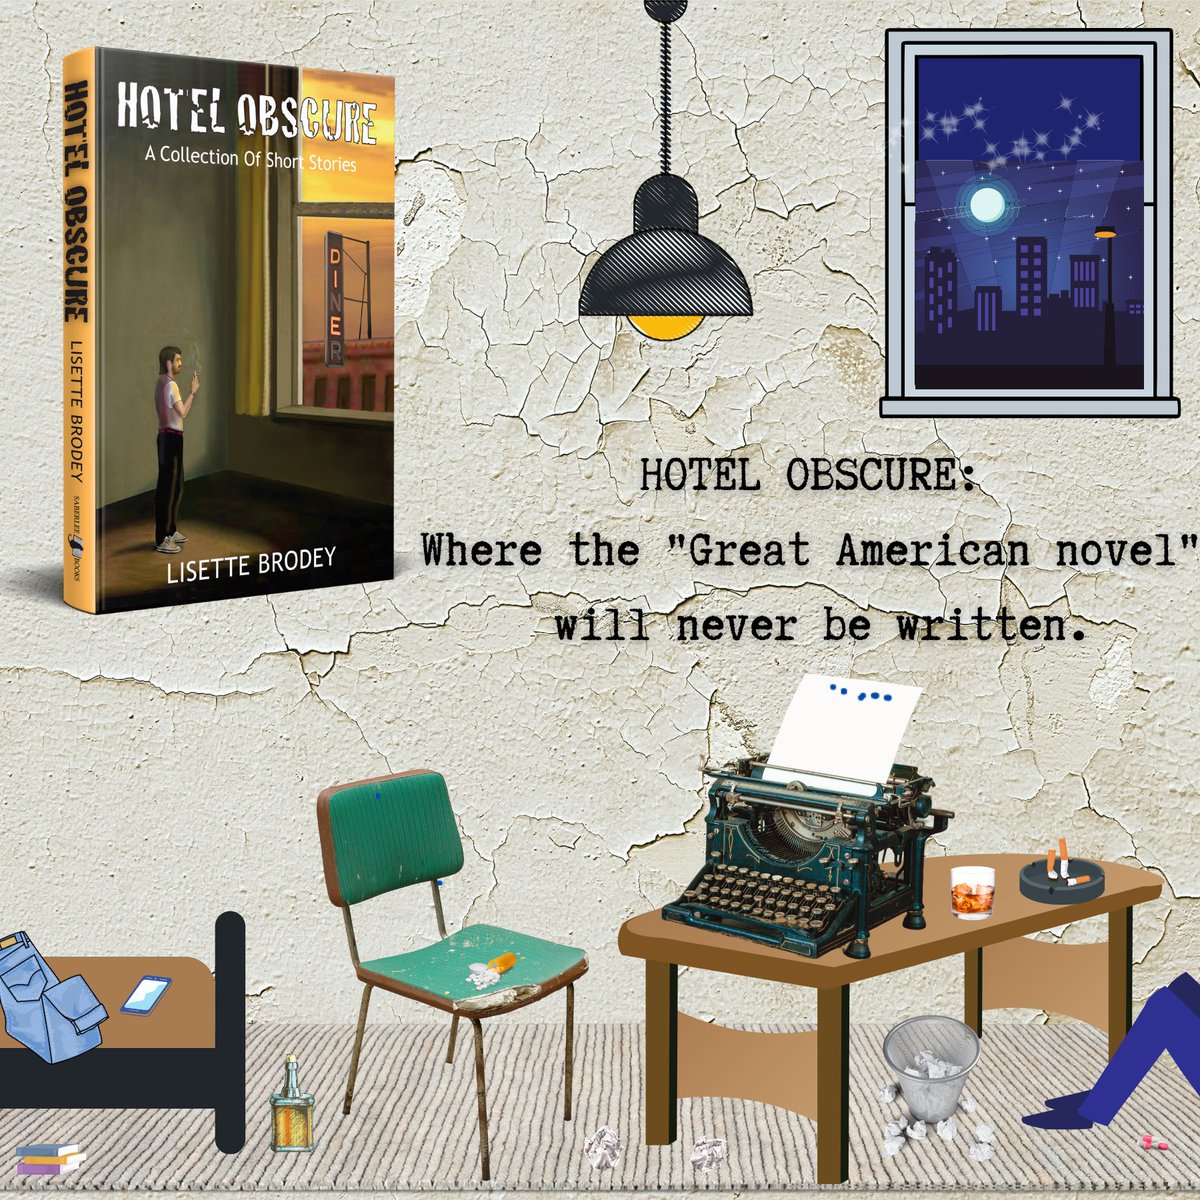 HOTEL OBSCURE: A Collection of Short Stories 🌆 Aiden has a shocking encounter with a young prostitute 💥 Evan says an unusual goodbye to his cruel aunt ⚱ Winnie and Will fear their scammer son out of prison 💰 mybook.to/HotelObscure #urban 📗 #KU